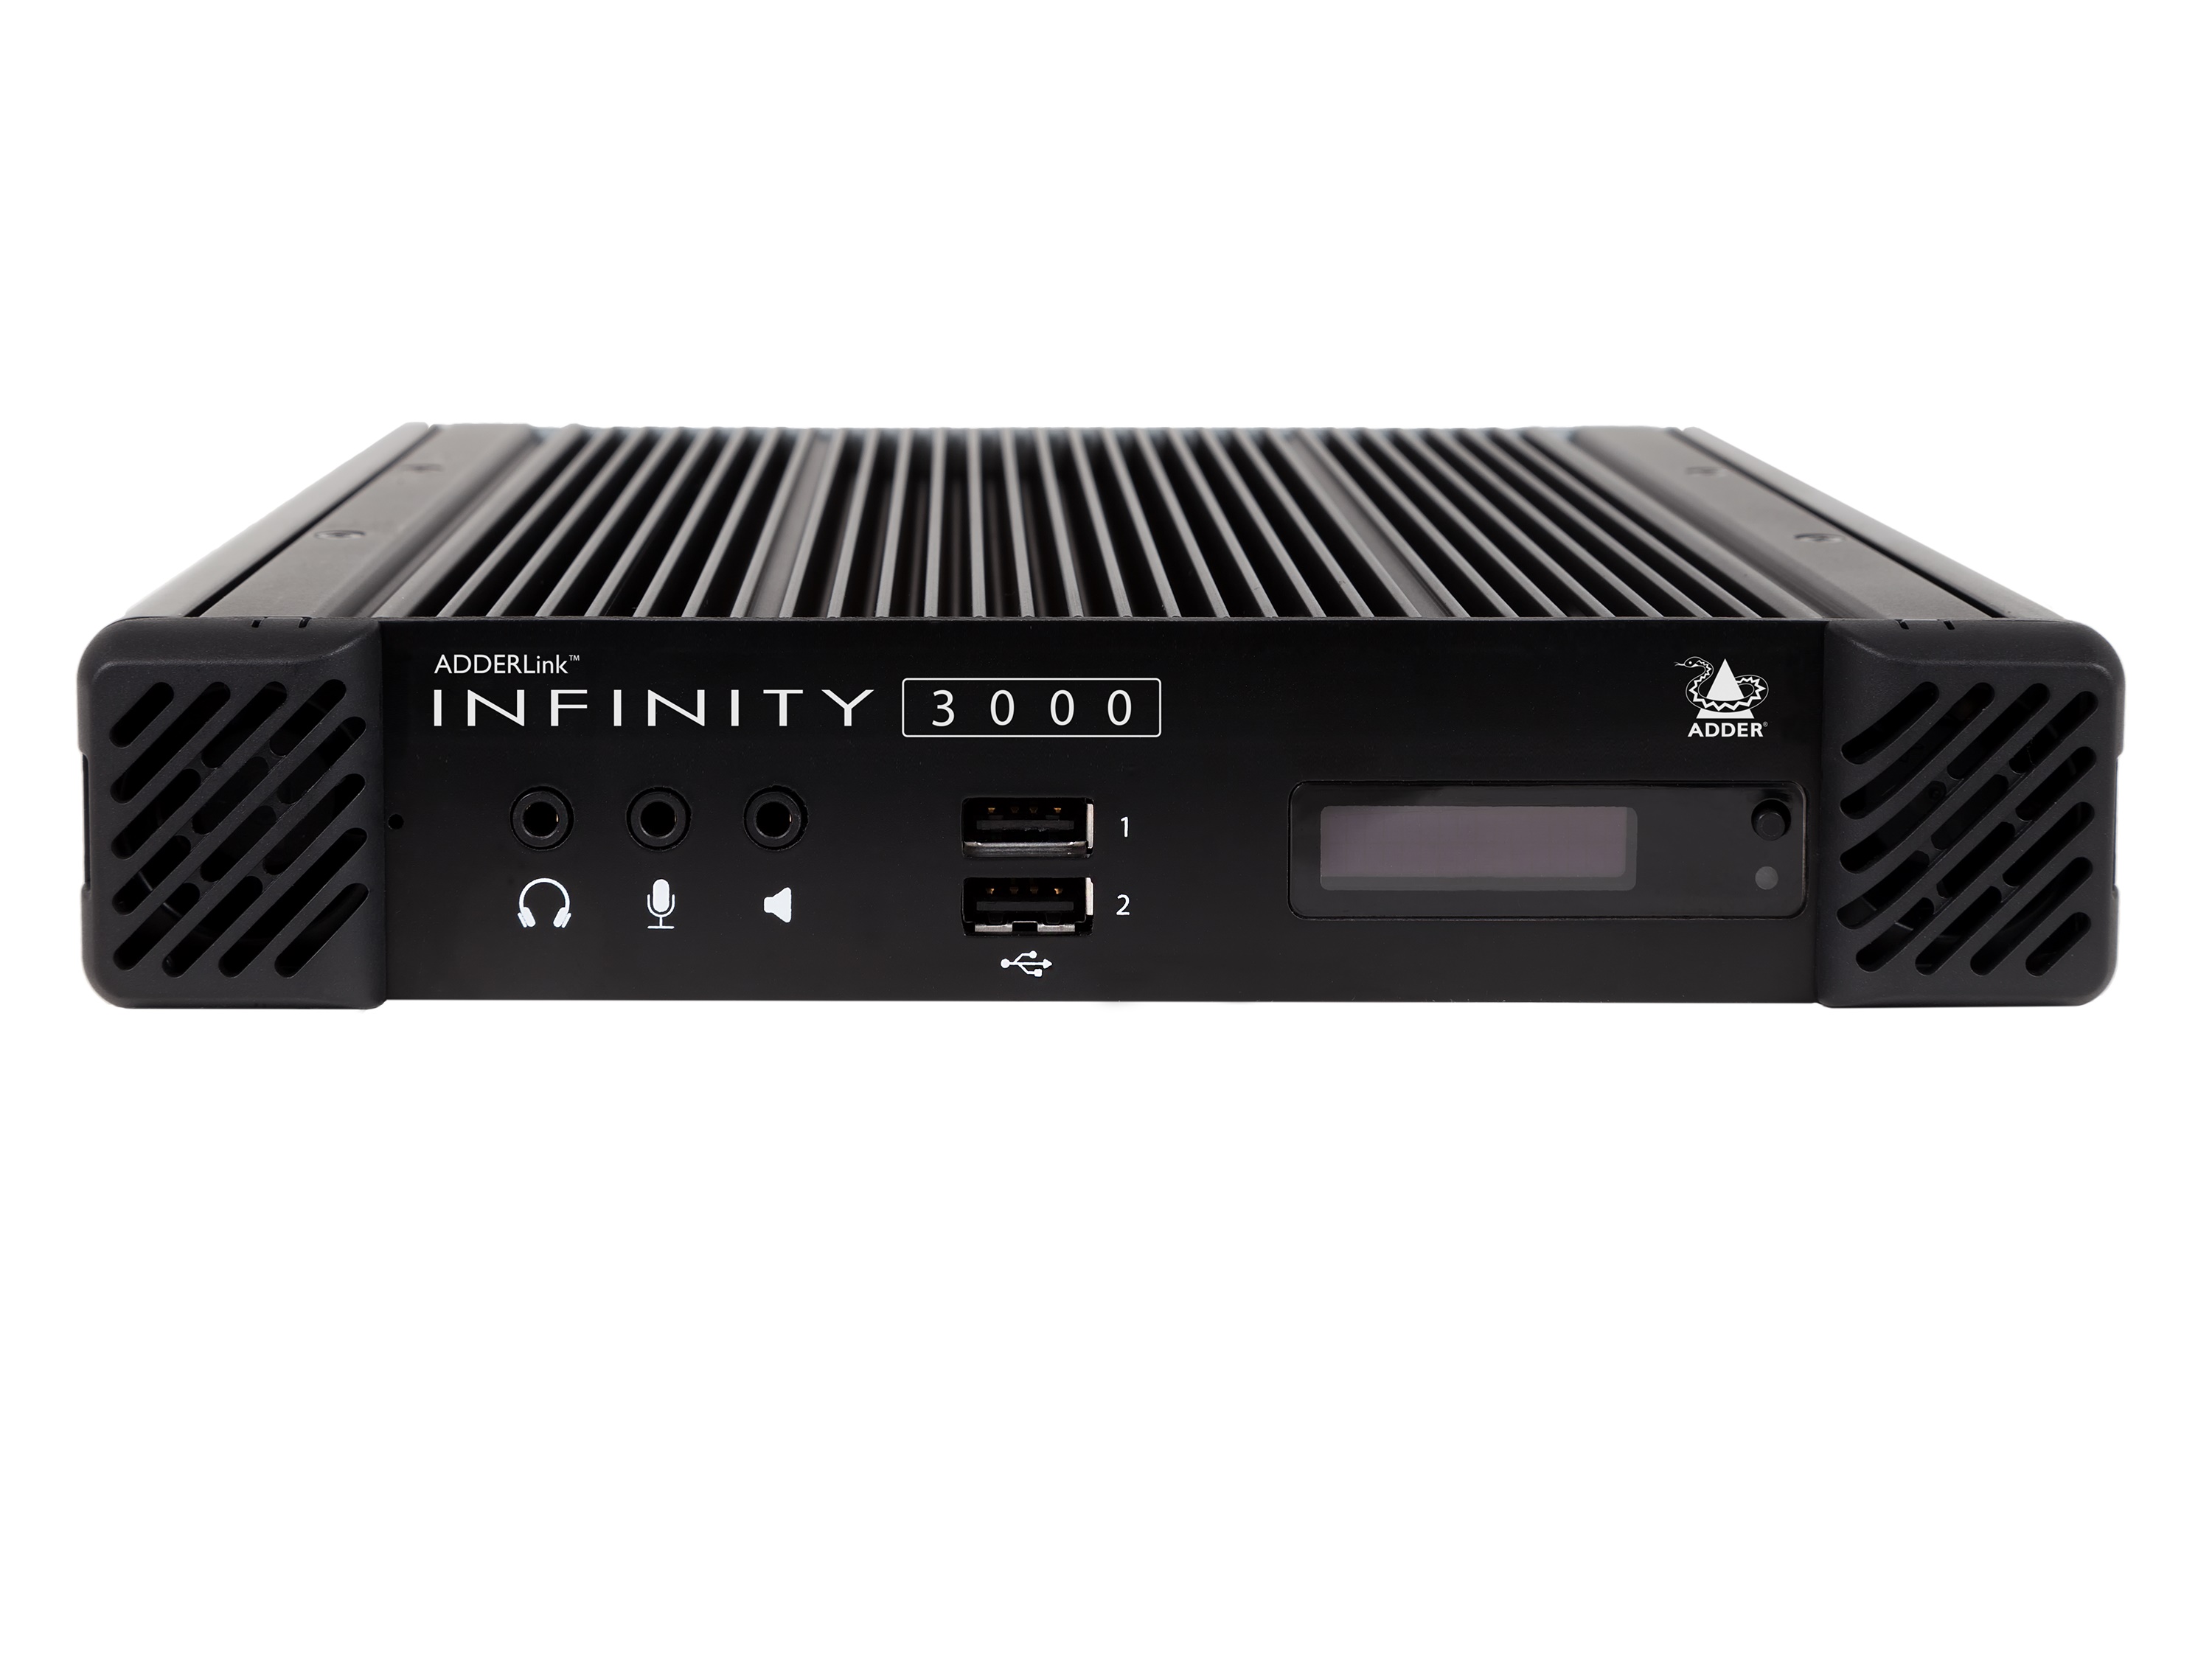 ALIF3000R-US Dual-Head USB 2.0 IP KVM Extender with Delivering Unlimited Access to Virtual and Physical Machines/US by Adder